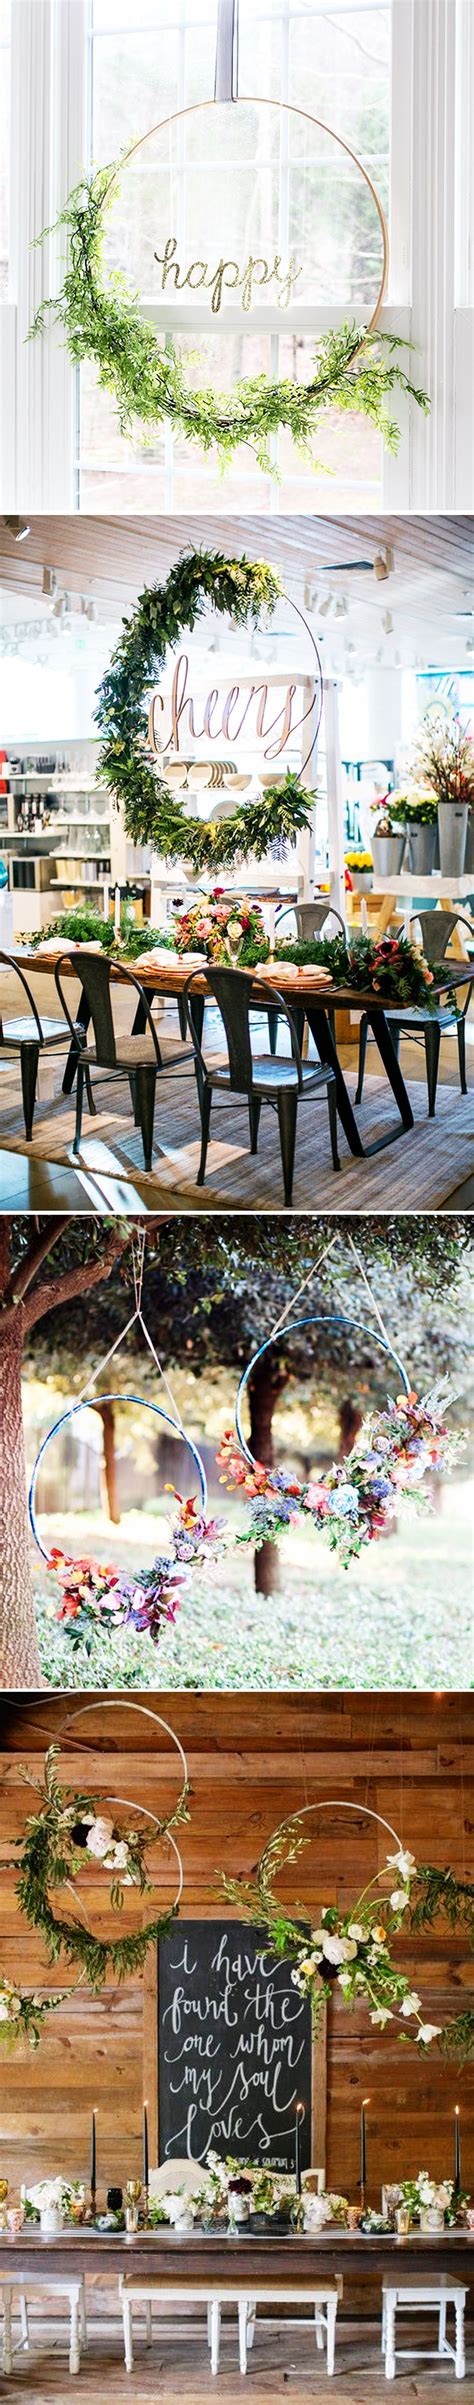 13 Awesome Diy Hula Hoop Wreaths Pretty My Party Party Ideas